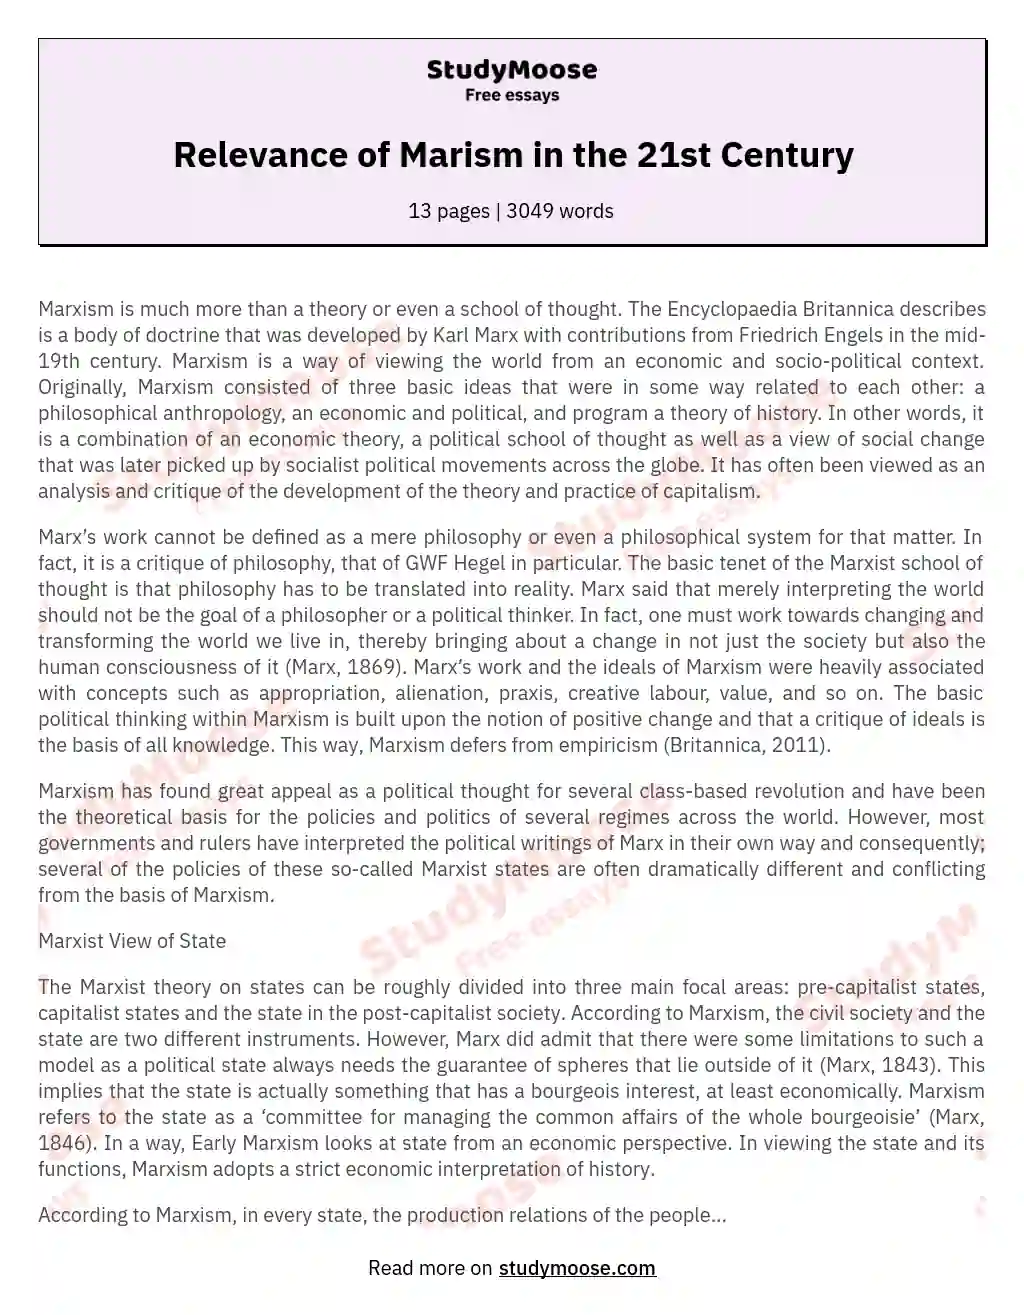 Relevance of Marism in the 21st Century essay